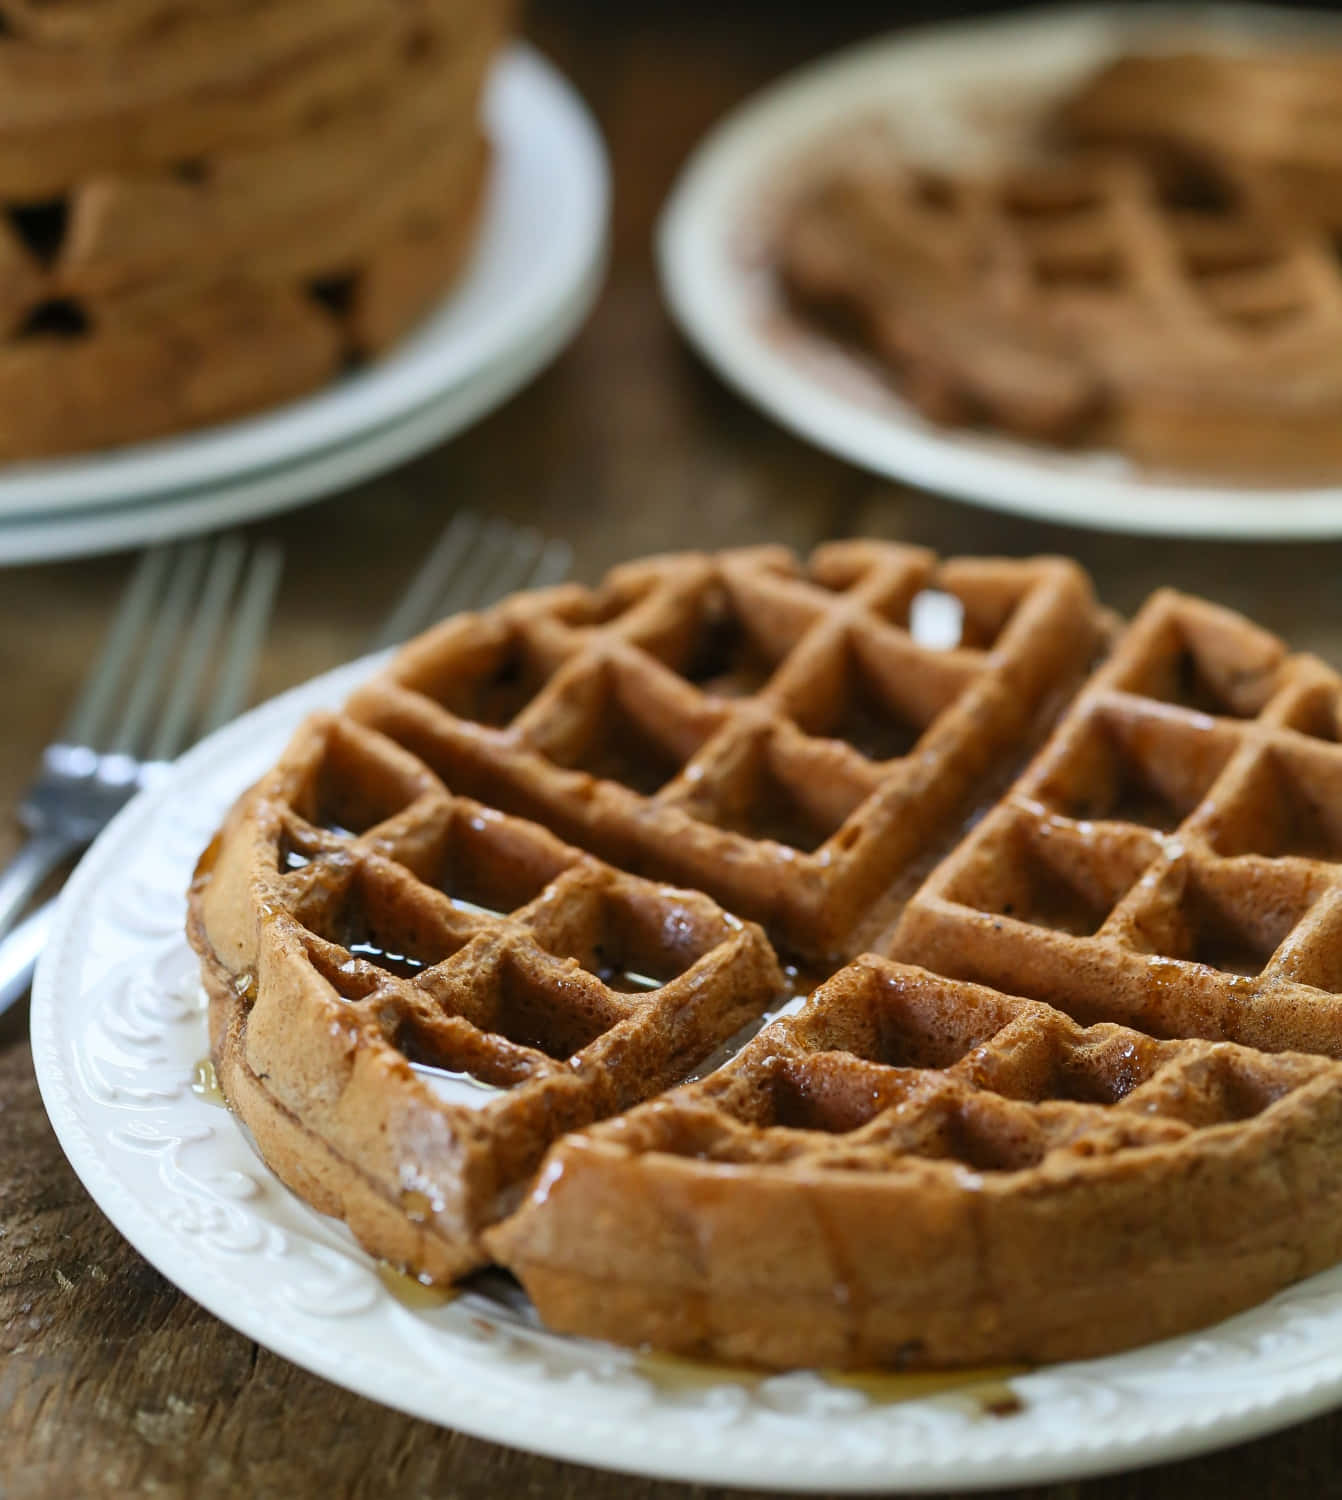 Enjoy a warm and delicious waffle for breakfast